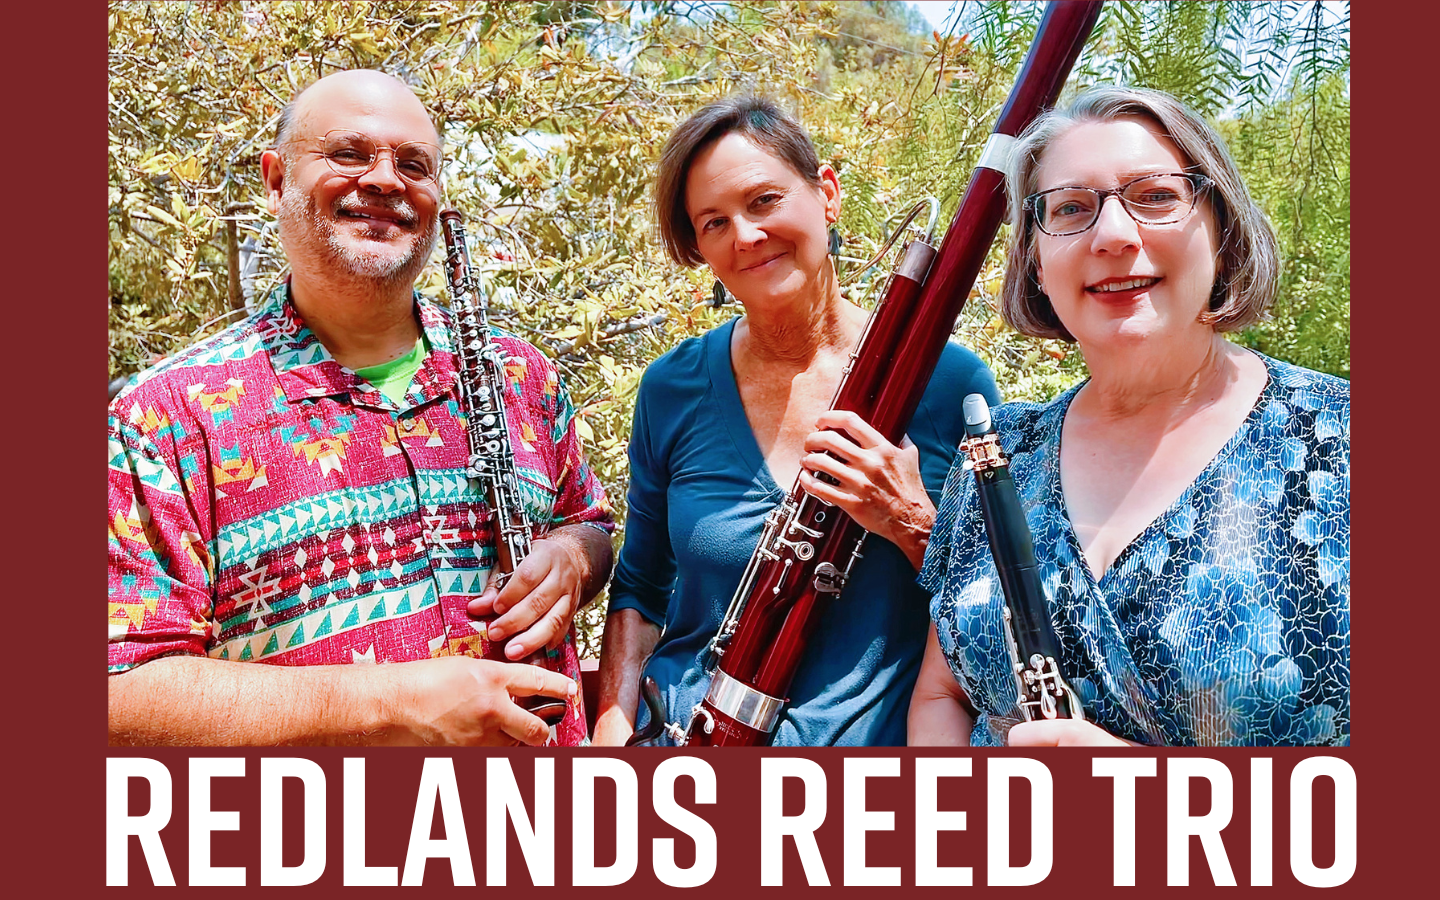 Redlands Reed Trio (1440 × 900 px).png